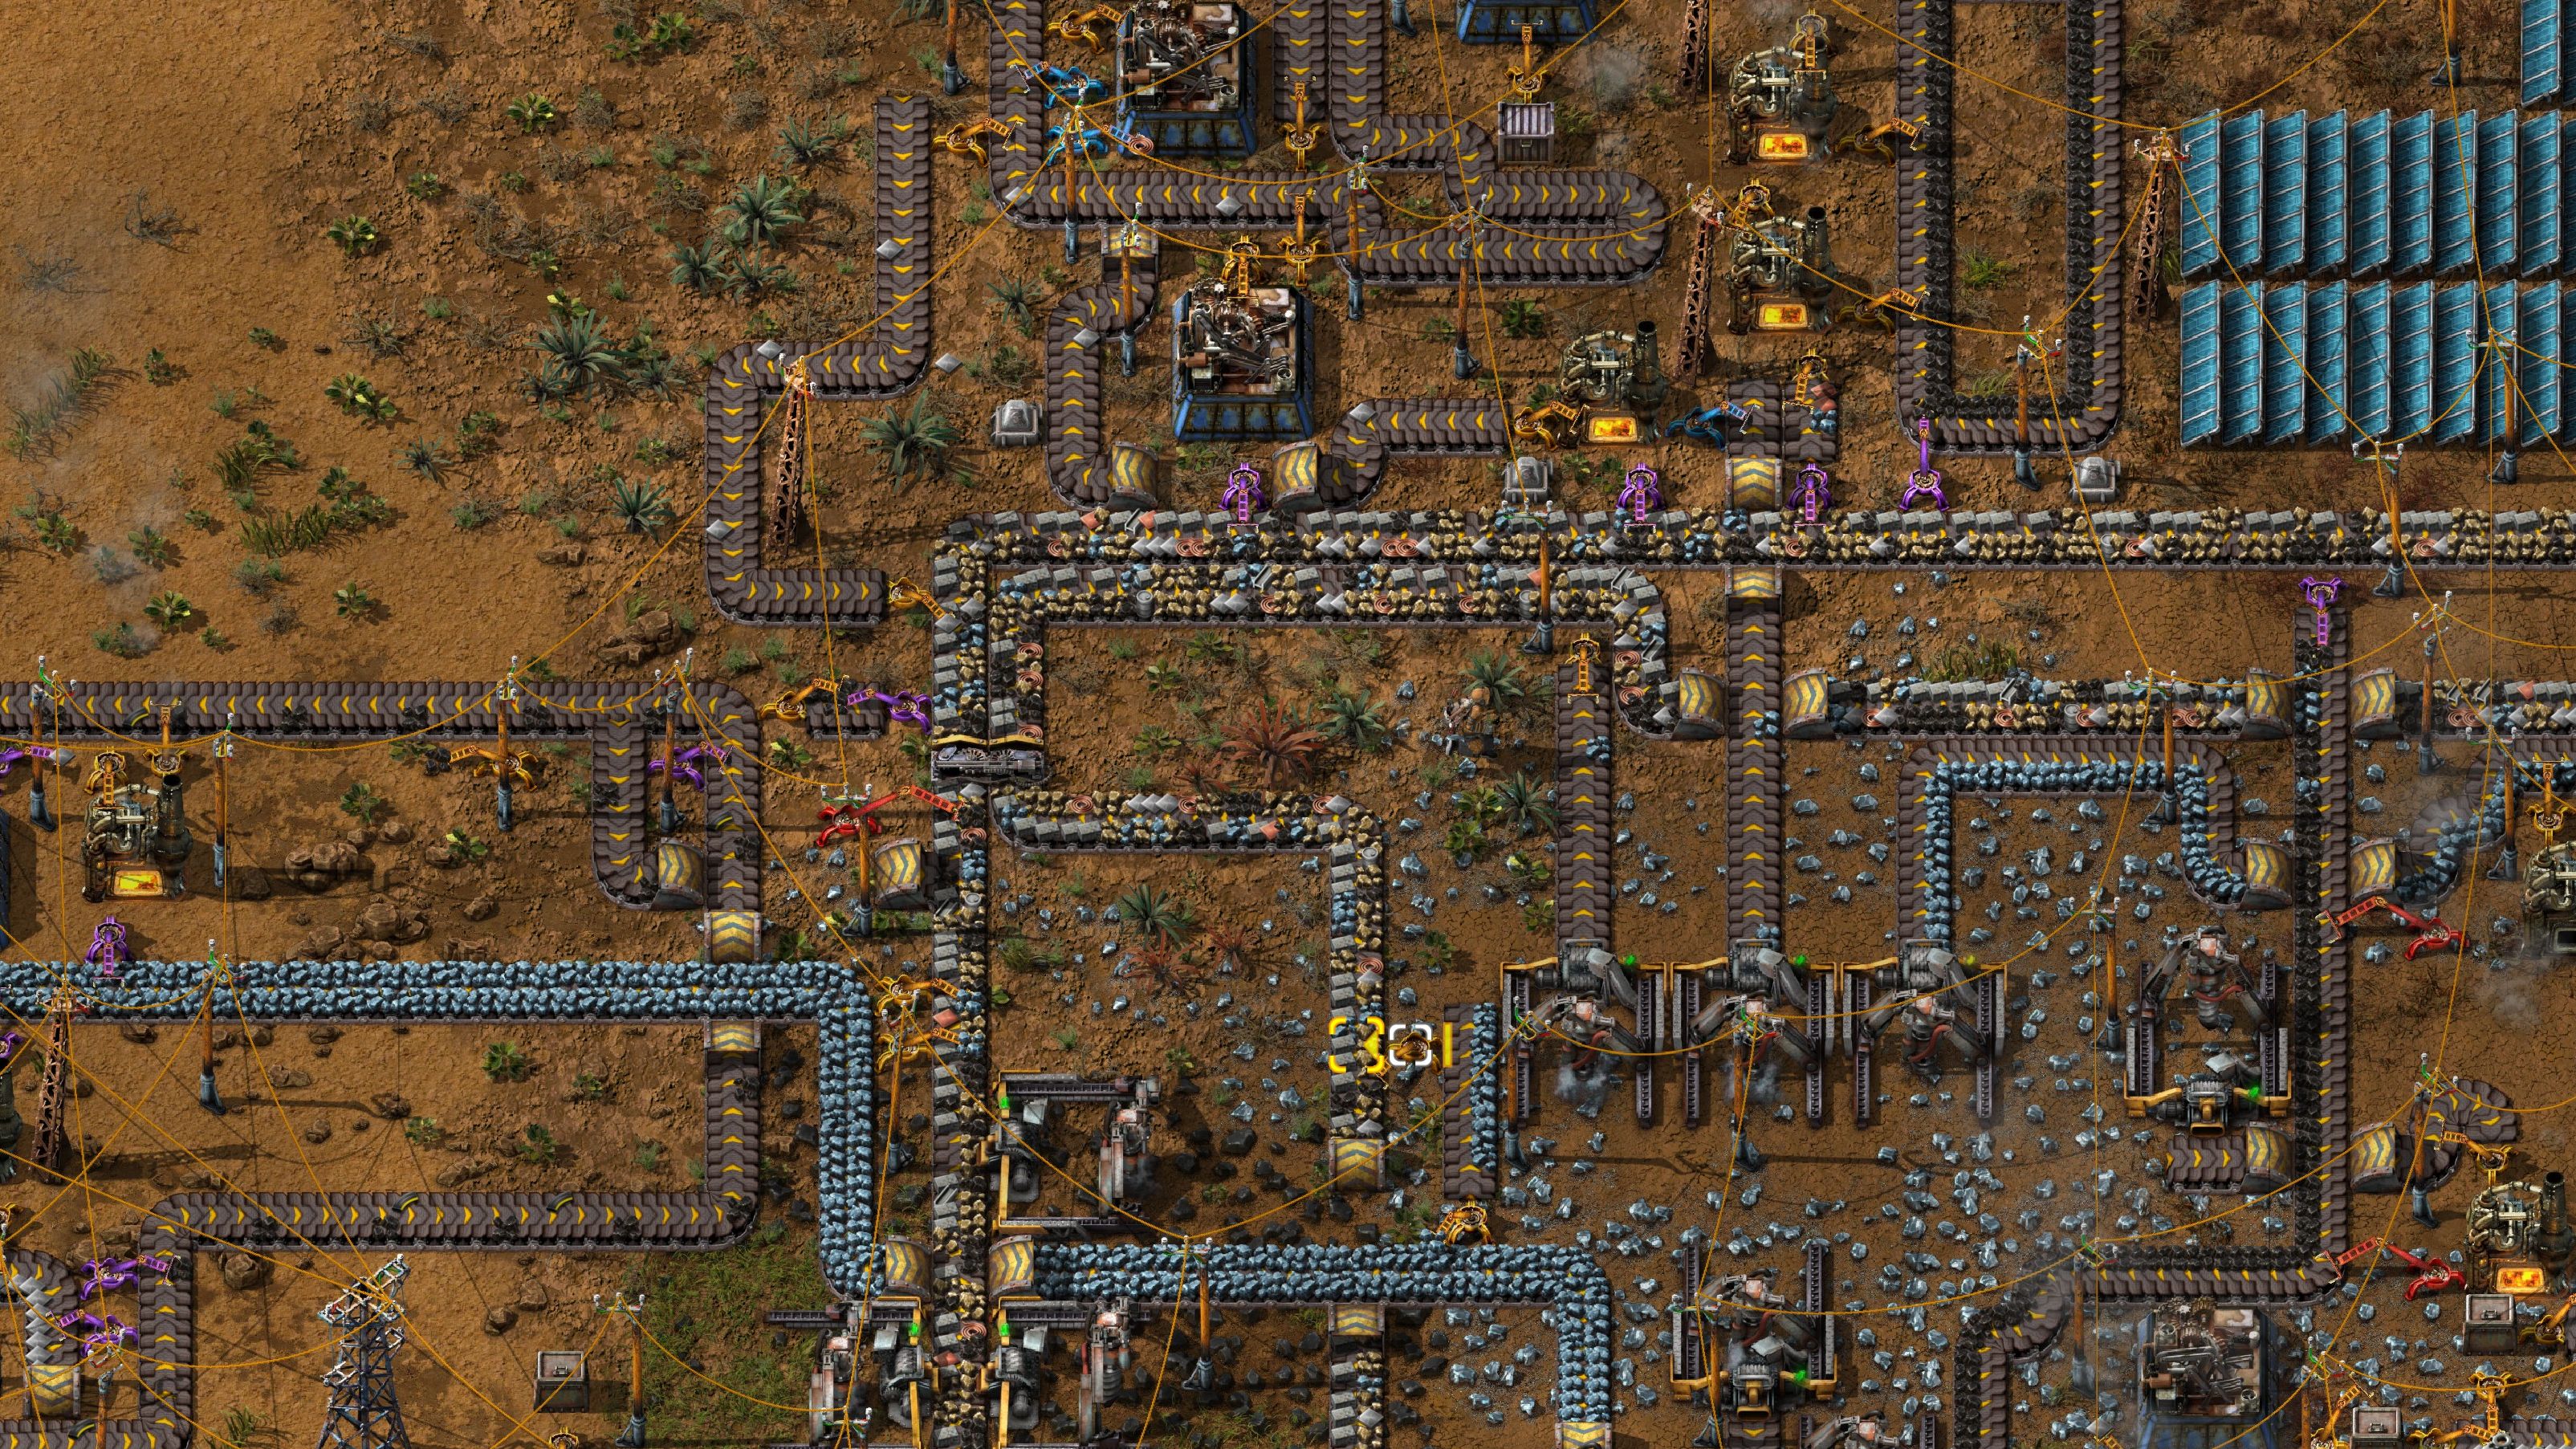 Belts and ores in Factorio